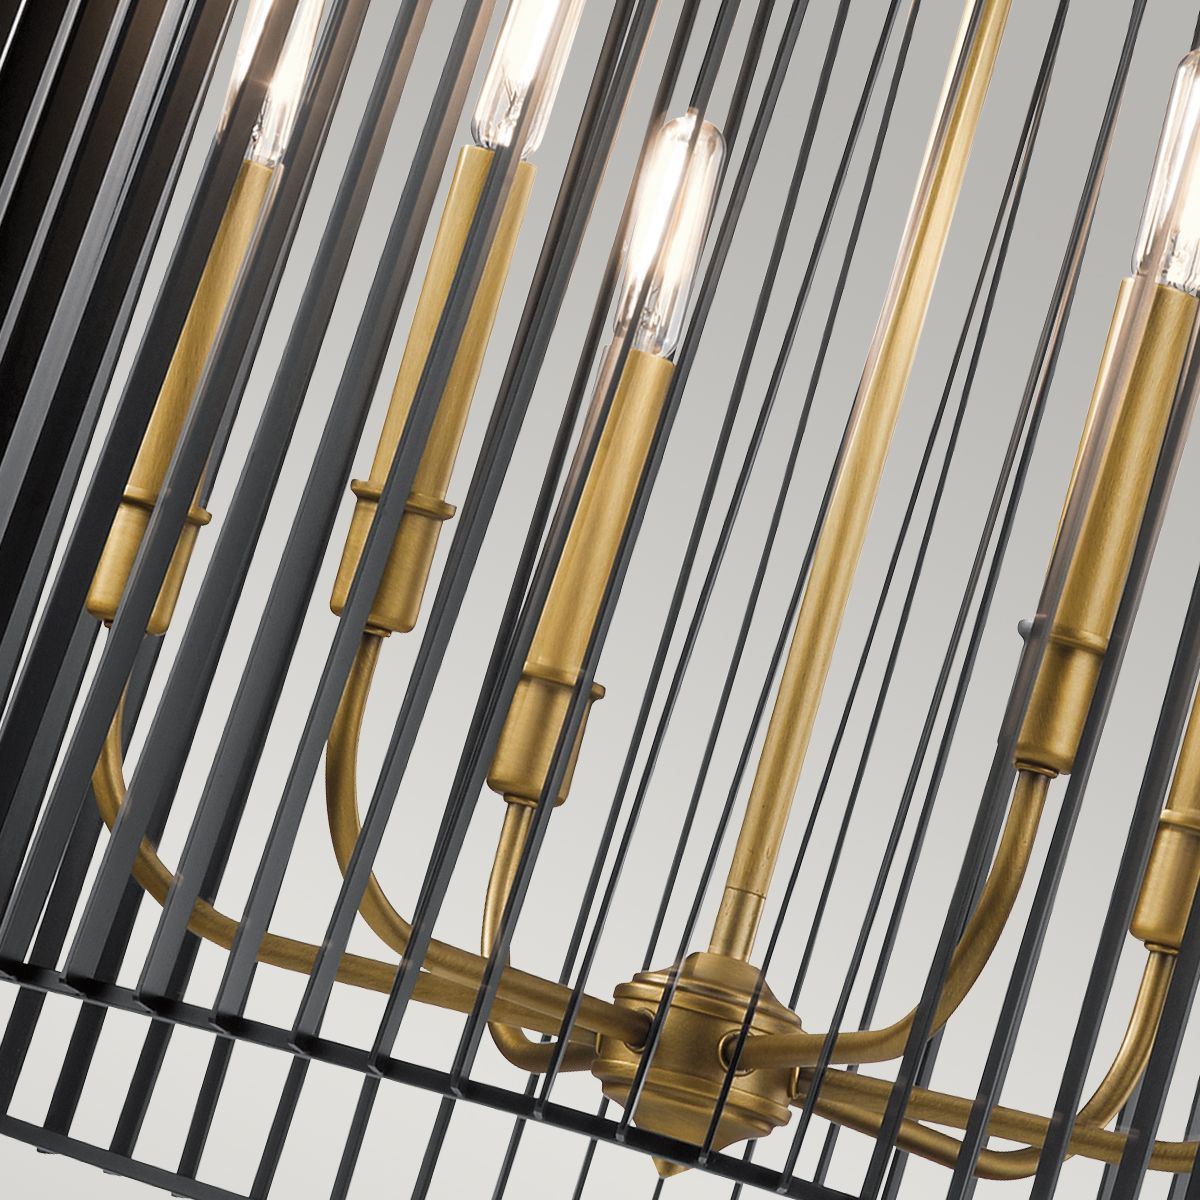 6 Light Chandelier In Natural Brass With Black Slatted Shade